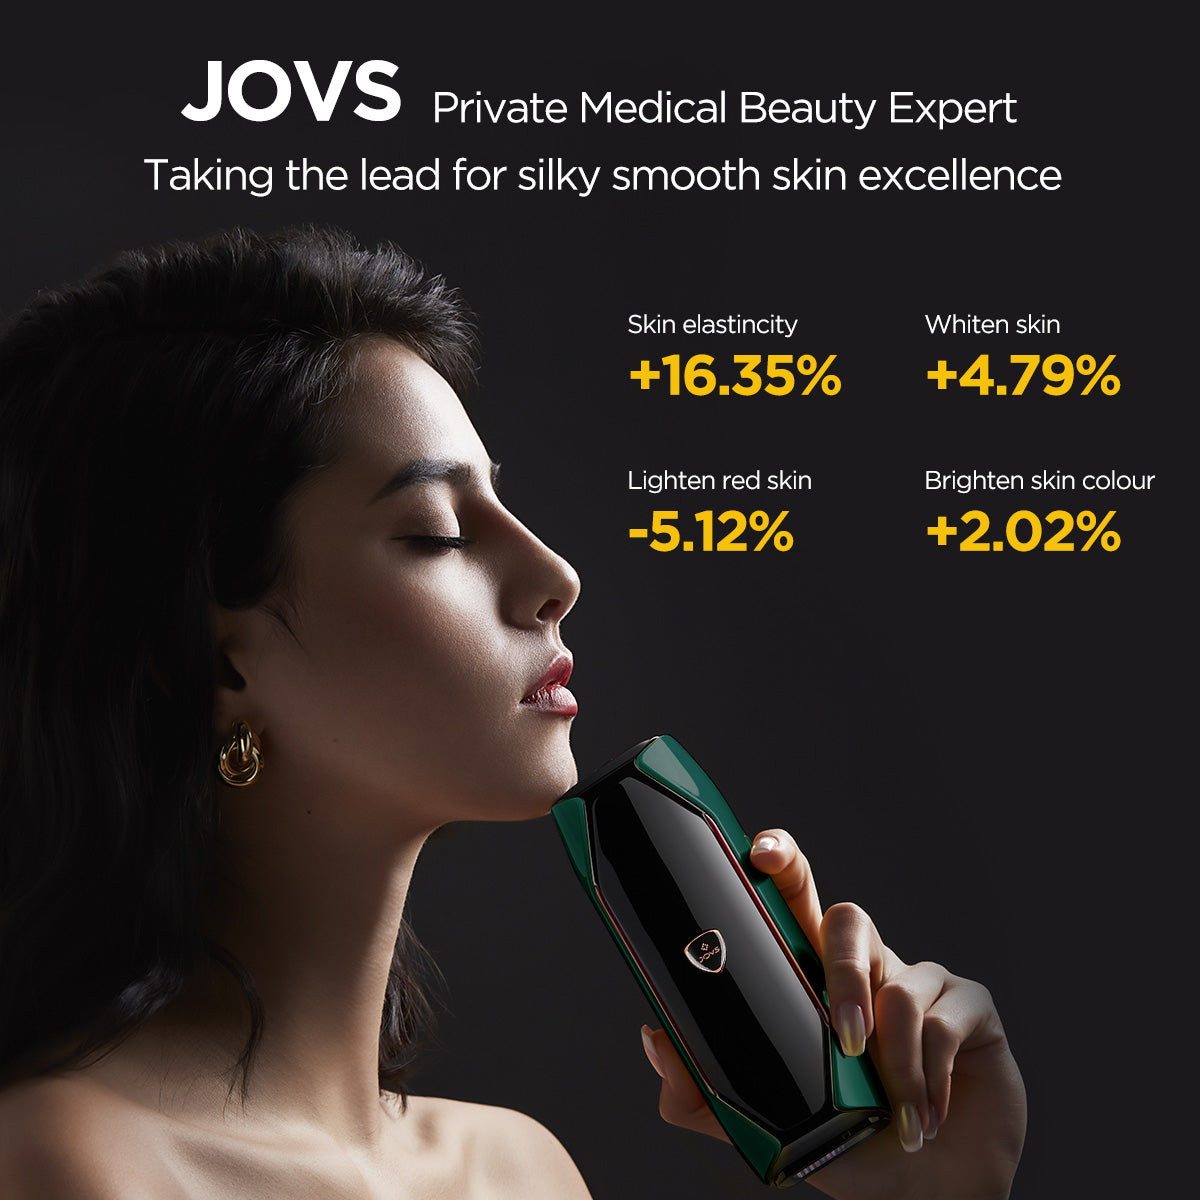 JOVS X™ 3-in-1 Hair Removal Handset enhancing skin elasticity and tone, perfect for hair removal and skin care for men and women.